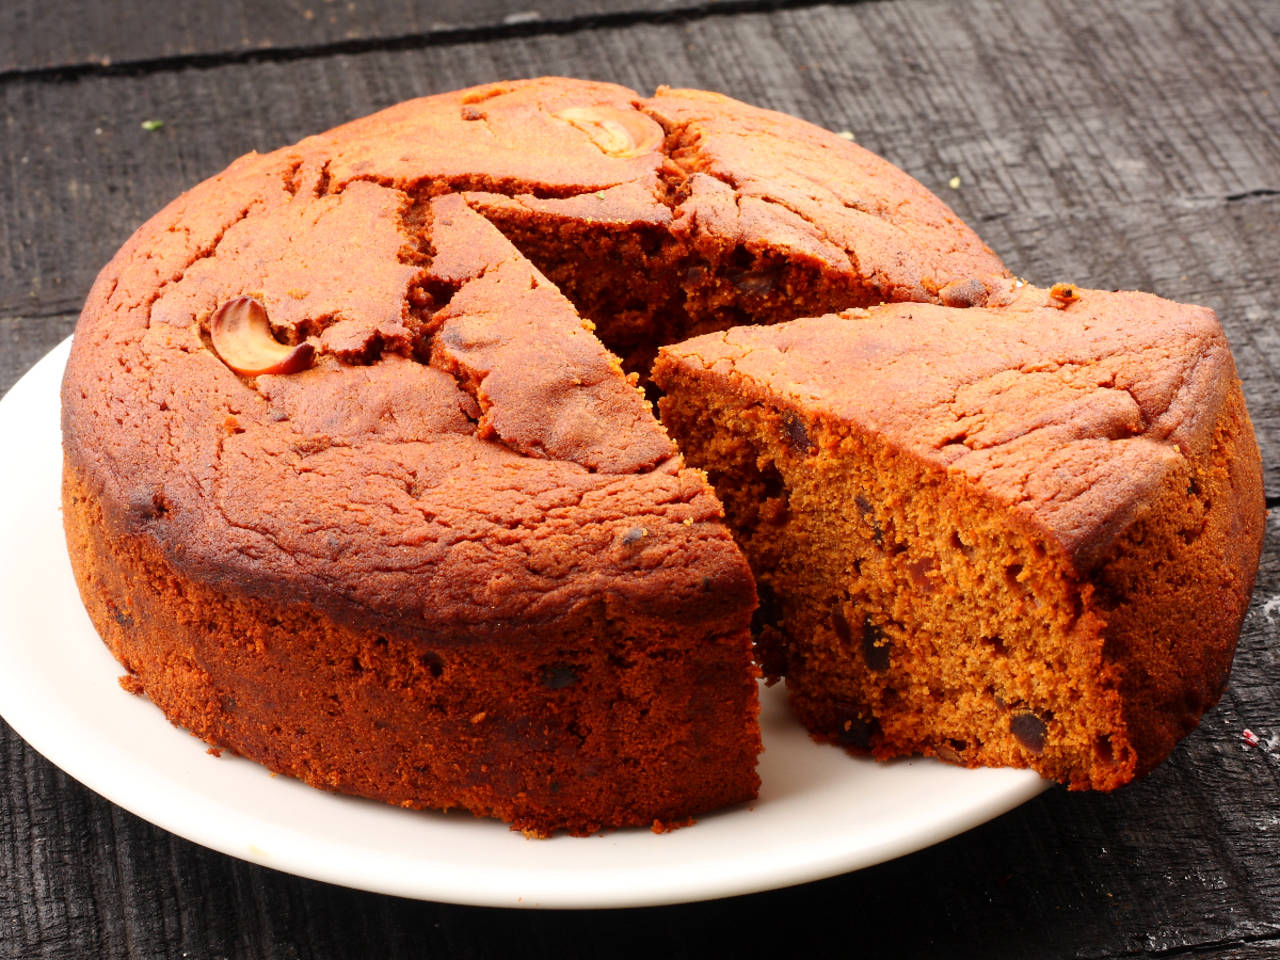 How to bake a cake without an oven - Times of India